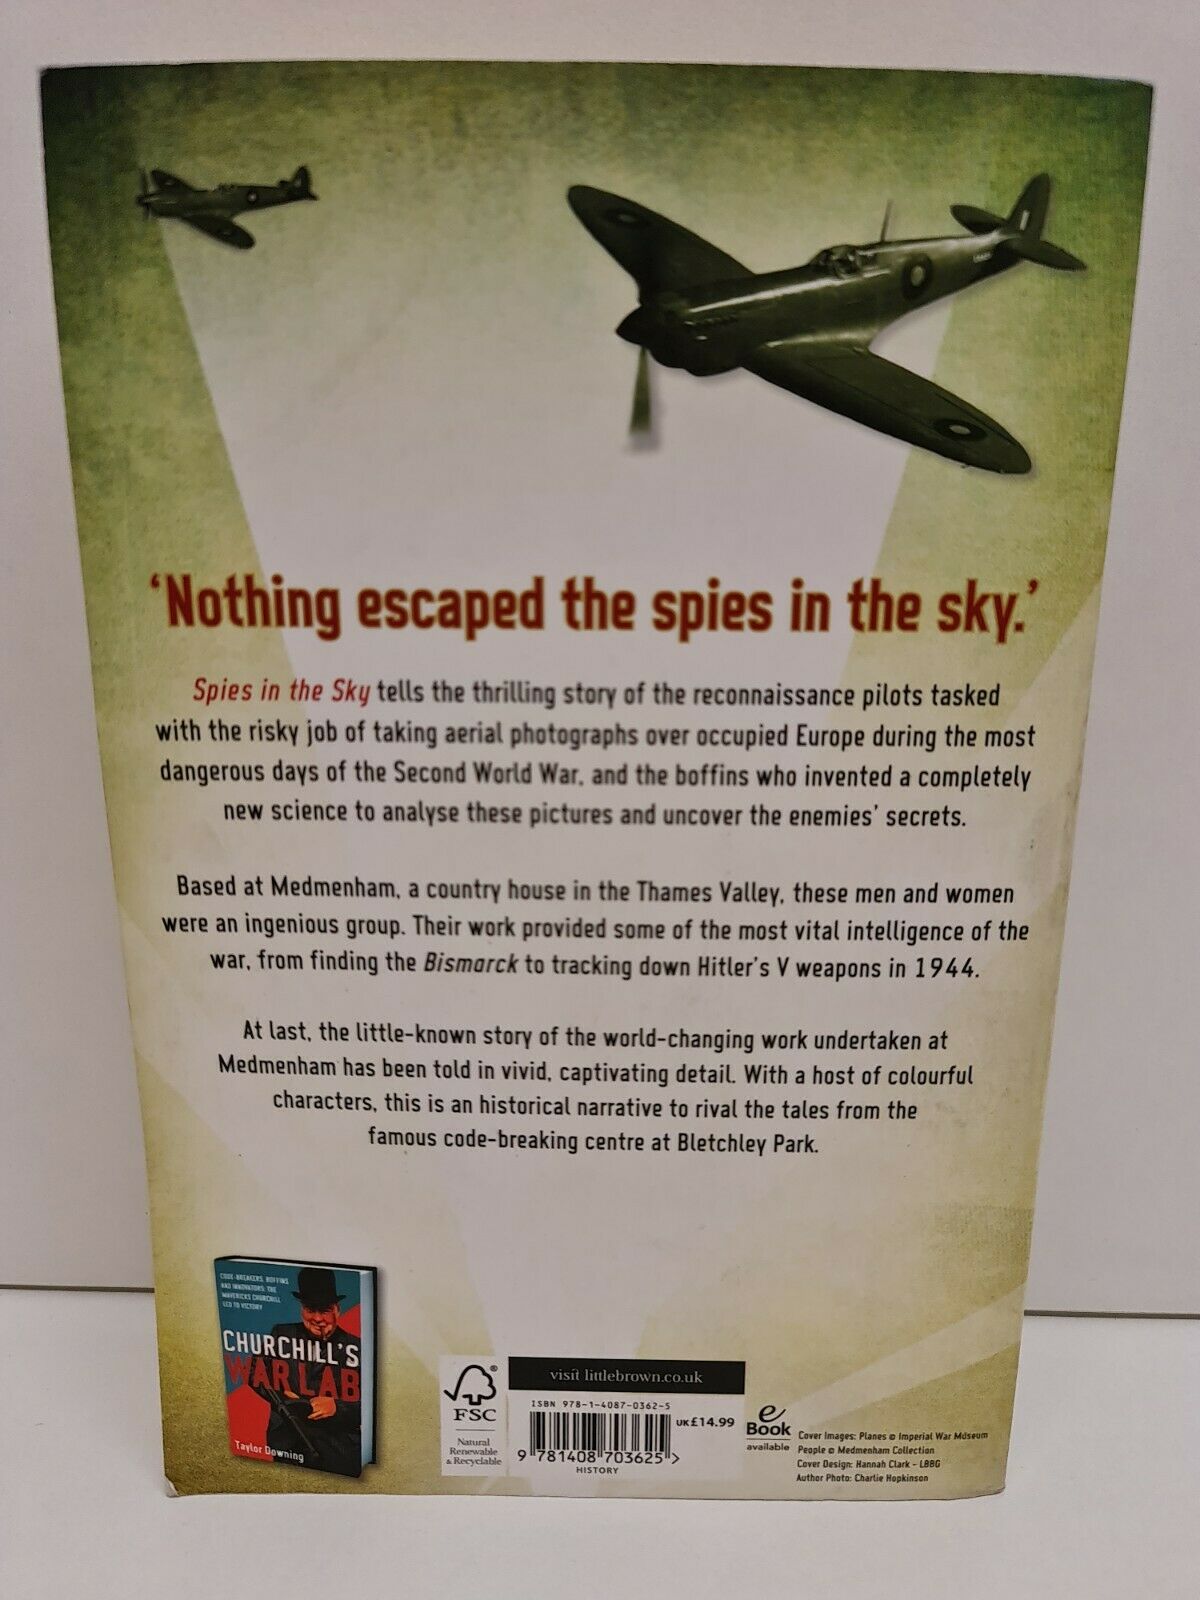 Spies In The Sky: The Secret Battle for Aerial Intelligence During World War II by Taylor Downing